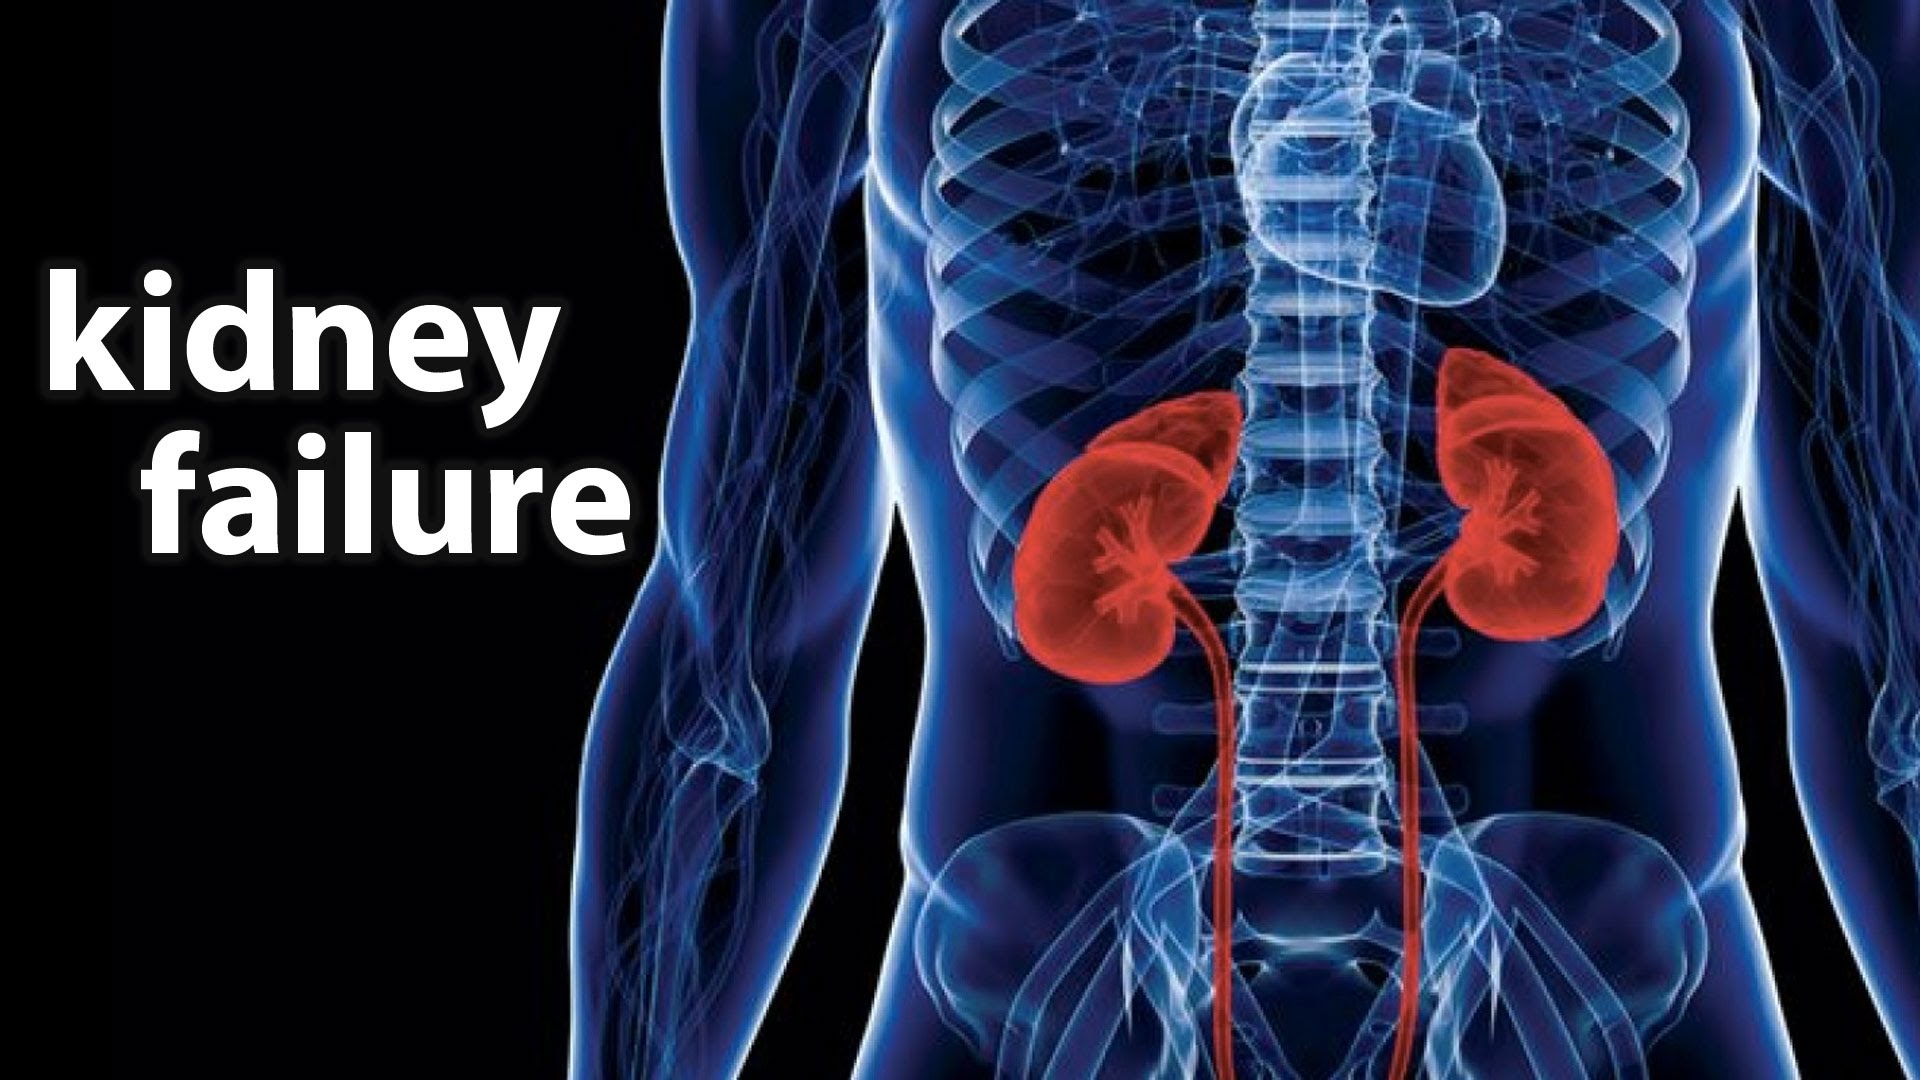 Kidneys Filter Waste Products From The Bloodstream - Kidney Failure , HD Wallpaper & Backgrounds